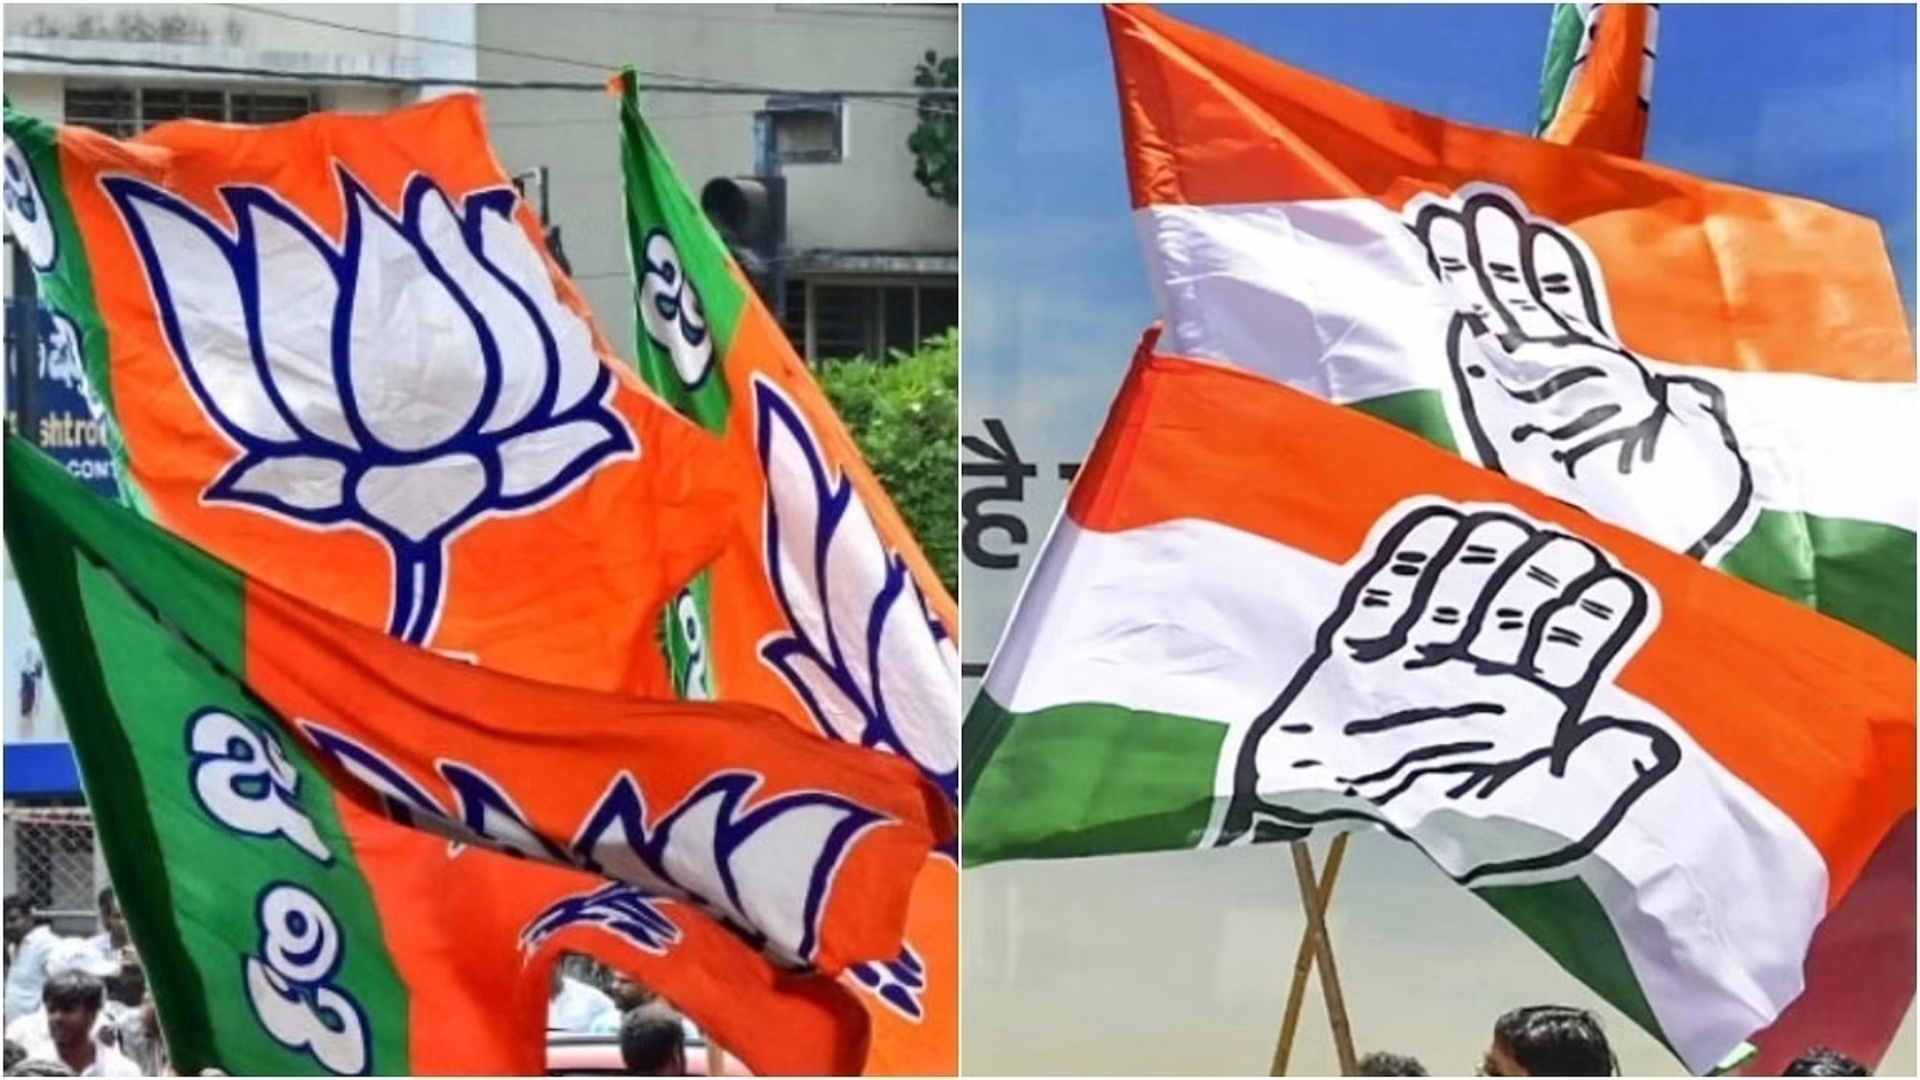 Congress Criticizes Timing of CAA Implementation, Alleges Election Strategy by BJP